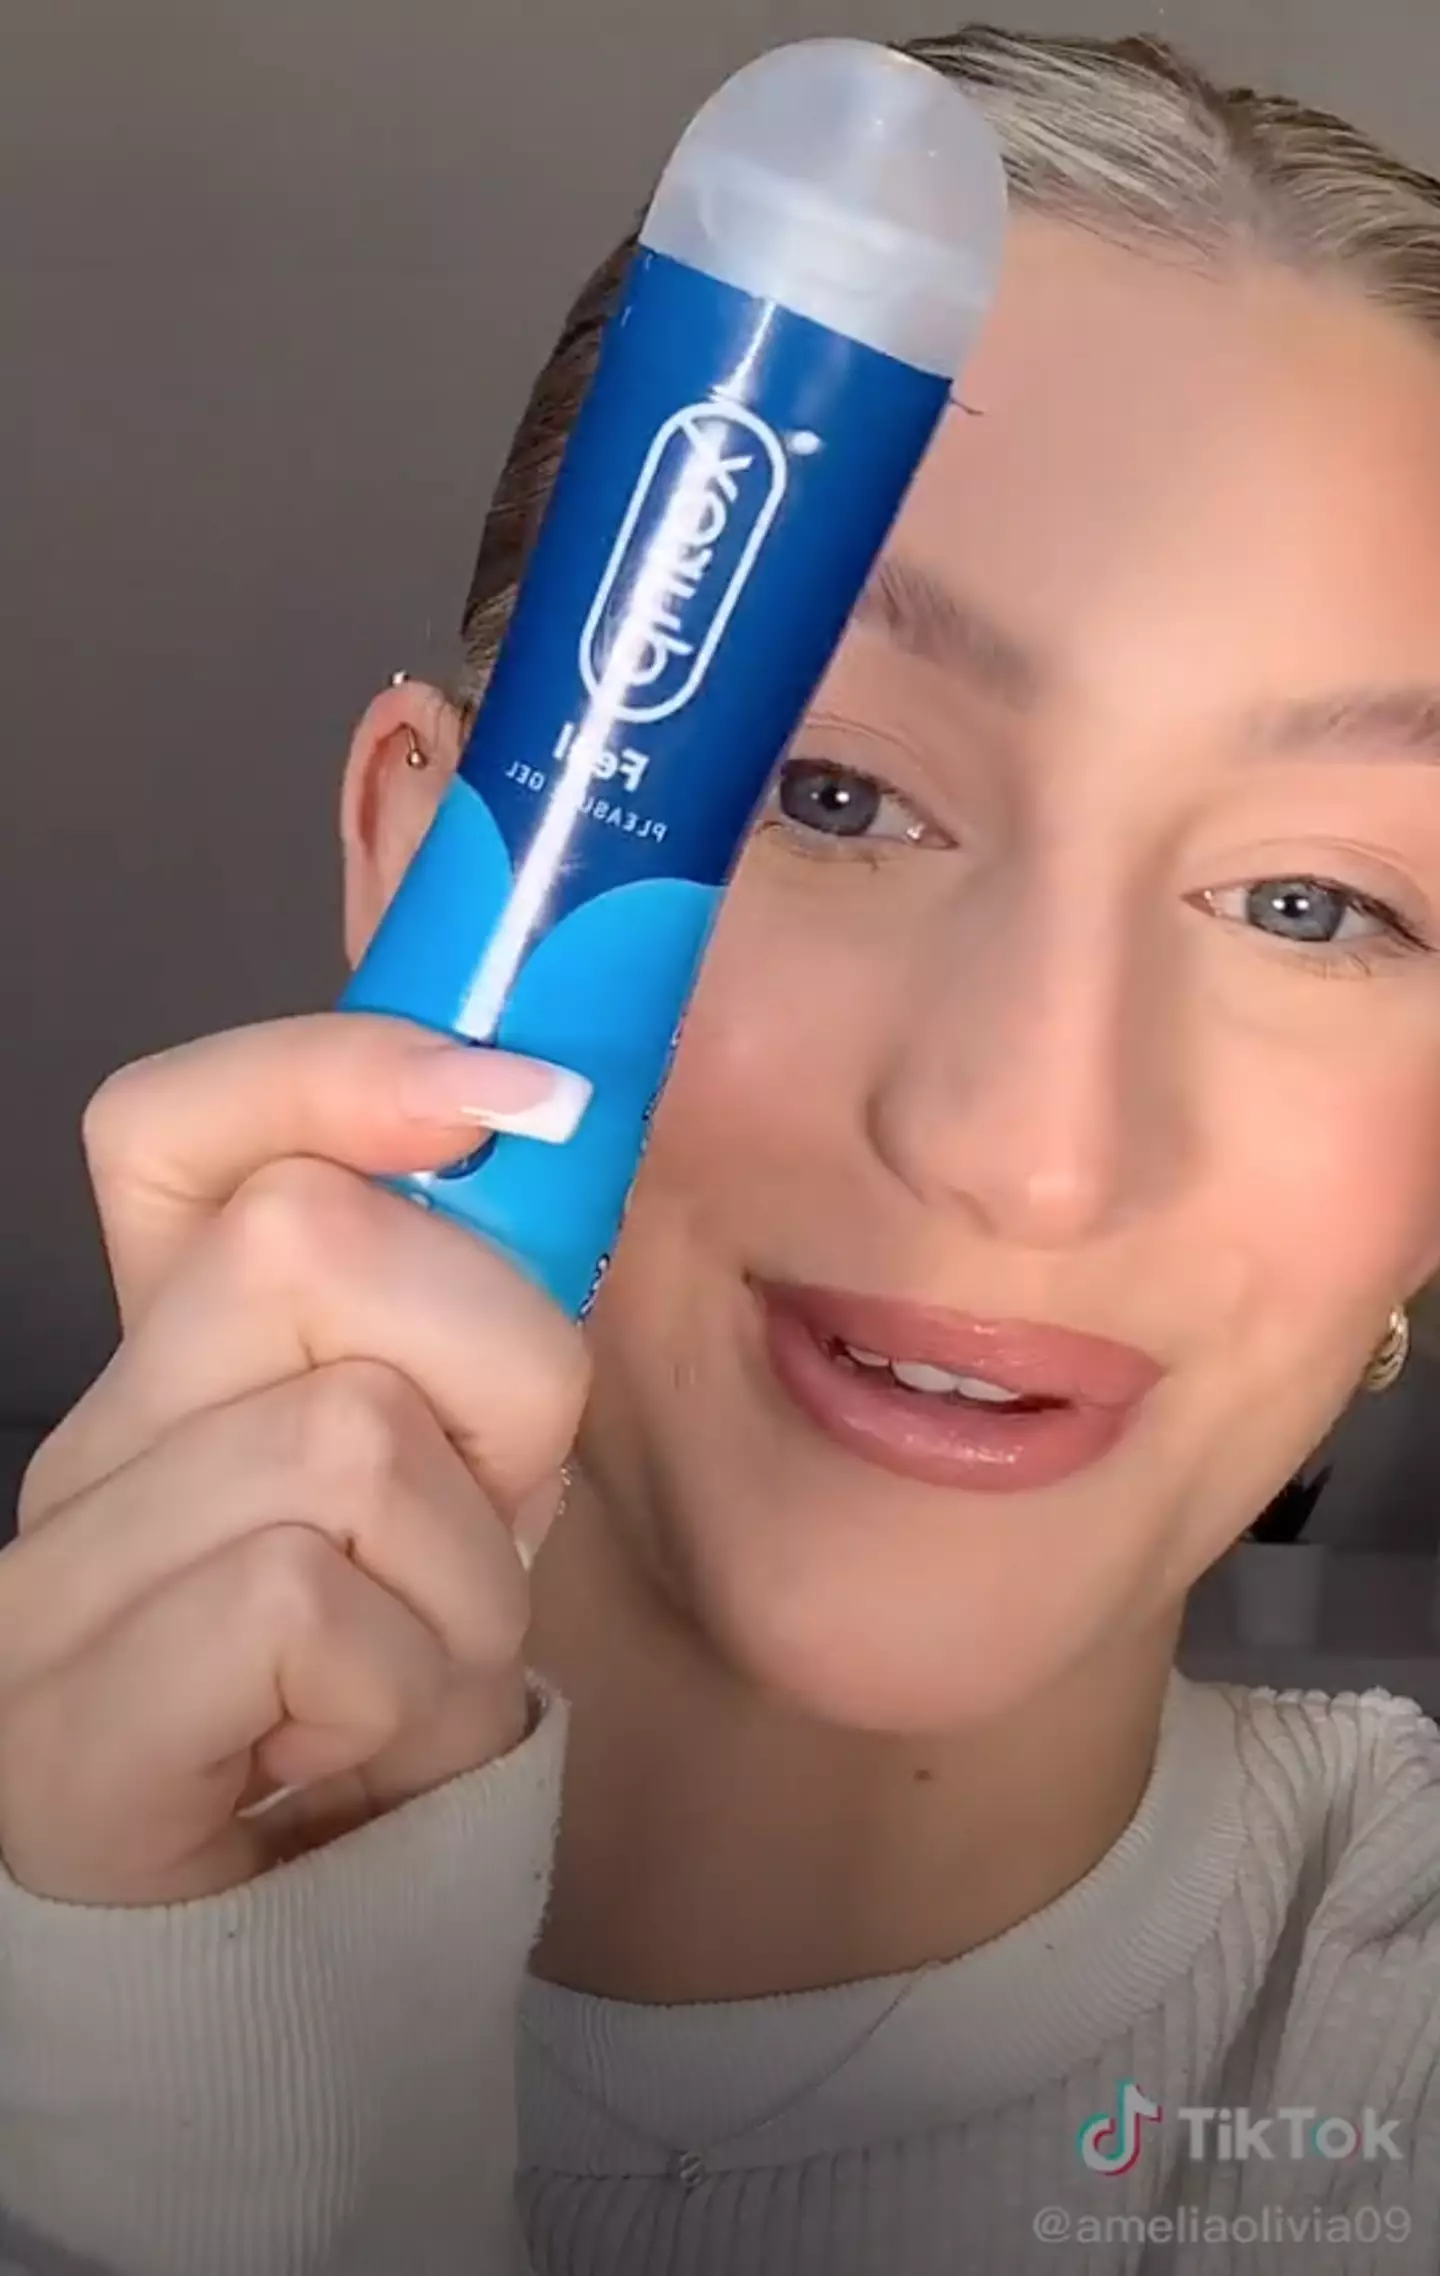 Amelia decided to try the lube makeup trend on TikTok (